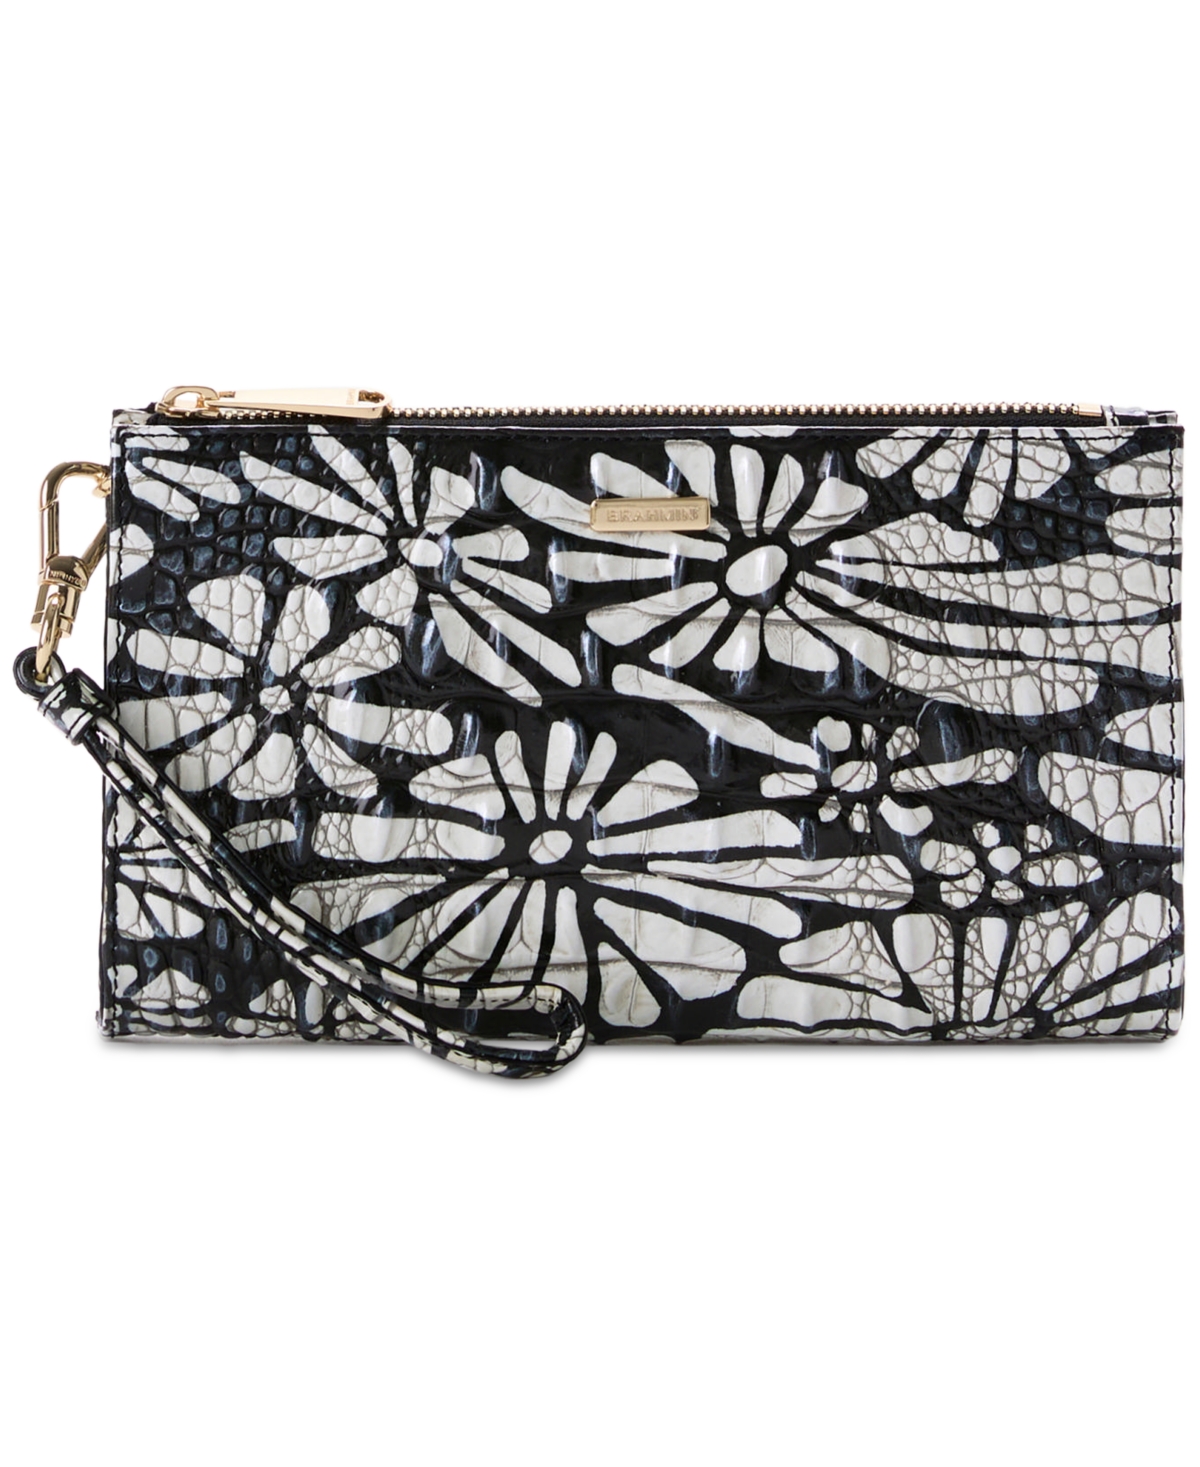 Daisy Melbourne Embossed Leather Clutch - Daisy Bati